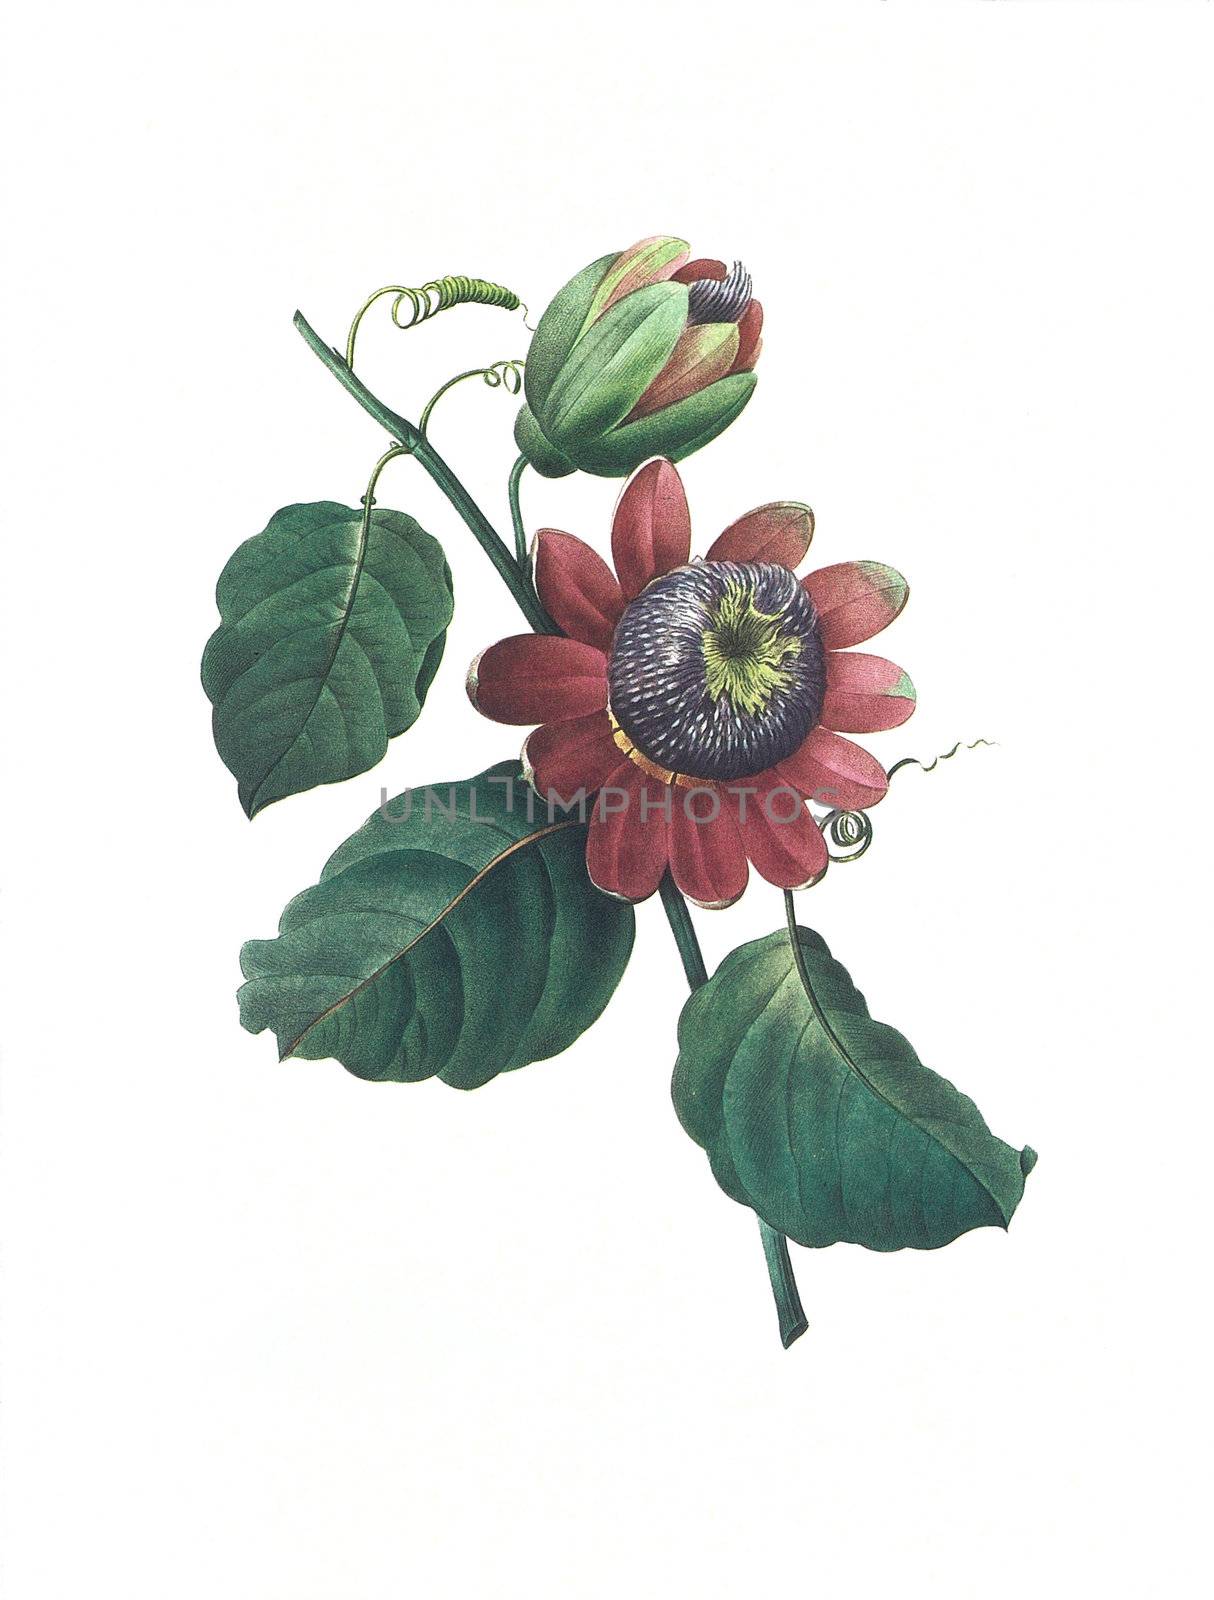 Antique illustration of a passionflower engraved by Pierre-Joseph Redoute (1759 - 1840), nicknamed "The Raphael of flowers".